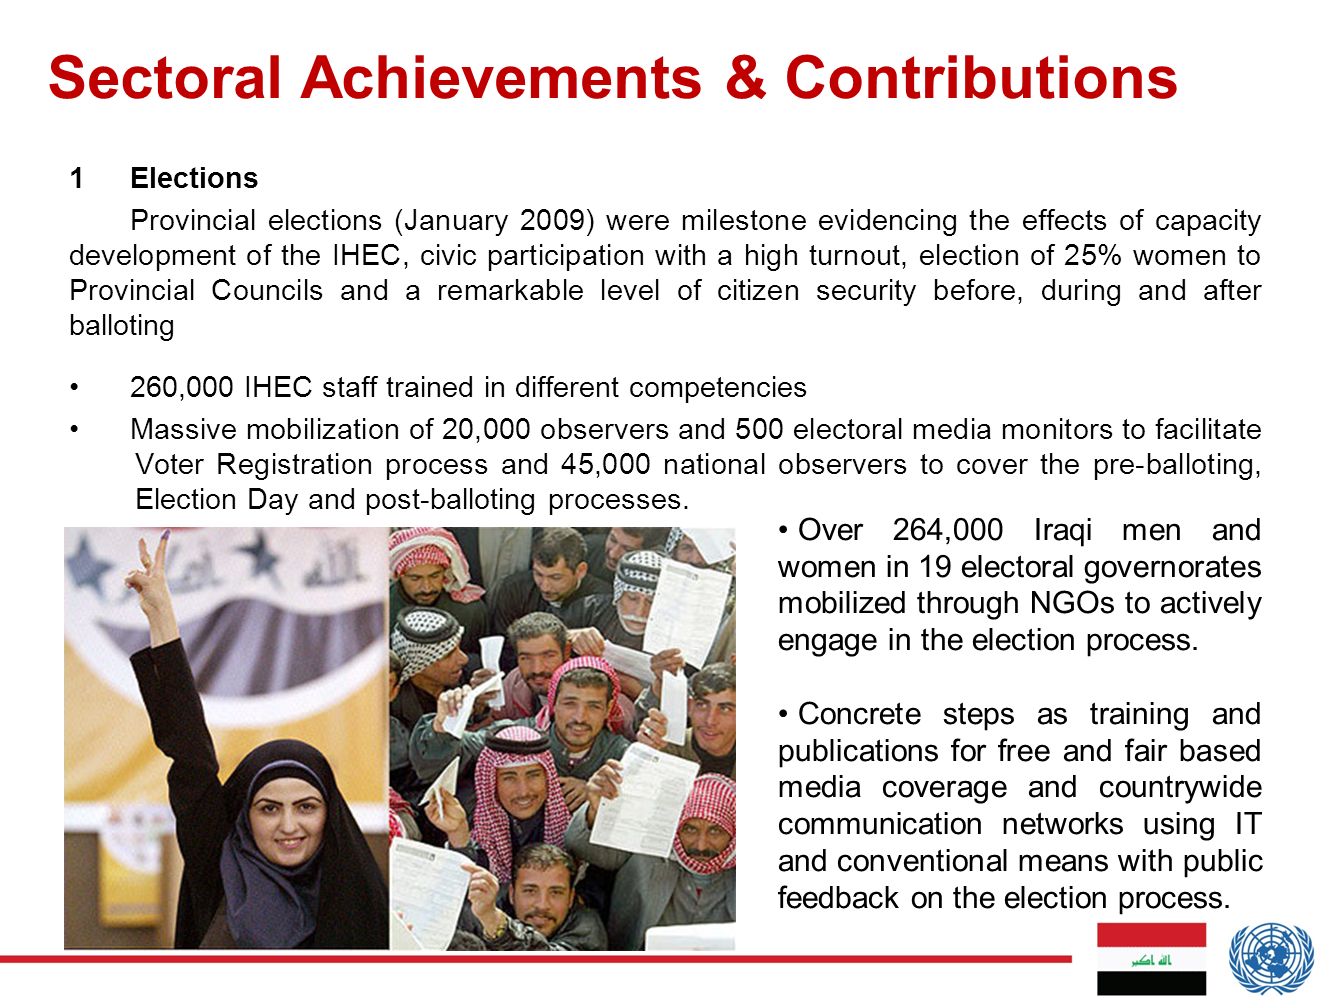 Sectoral Achievements & Contributions 1Elections Provincial elections (January 2009) were milestone evidencing the effects of capacity development of the IHEC, civic participation with a high turnout, election of 25% women to Provincial Councils and a remarkable level of citizen security before, during and after balloting 260,000 IHEC staff trained in different competencies Massive mobilization of 20,000 observers and 500 electoral media monitors to facilitate Voter Registration process and 45,000 national observers to cover the pre-balloting, Election Day and post-balloting processes.